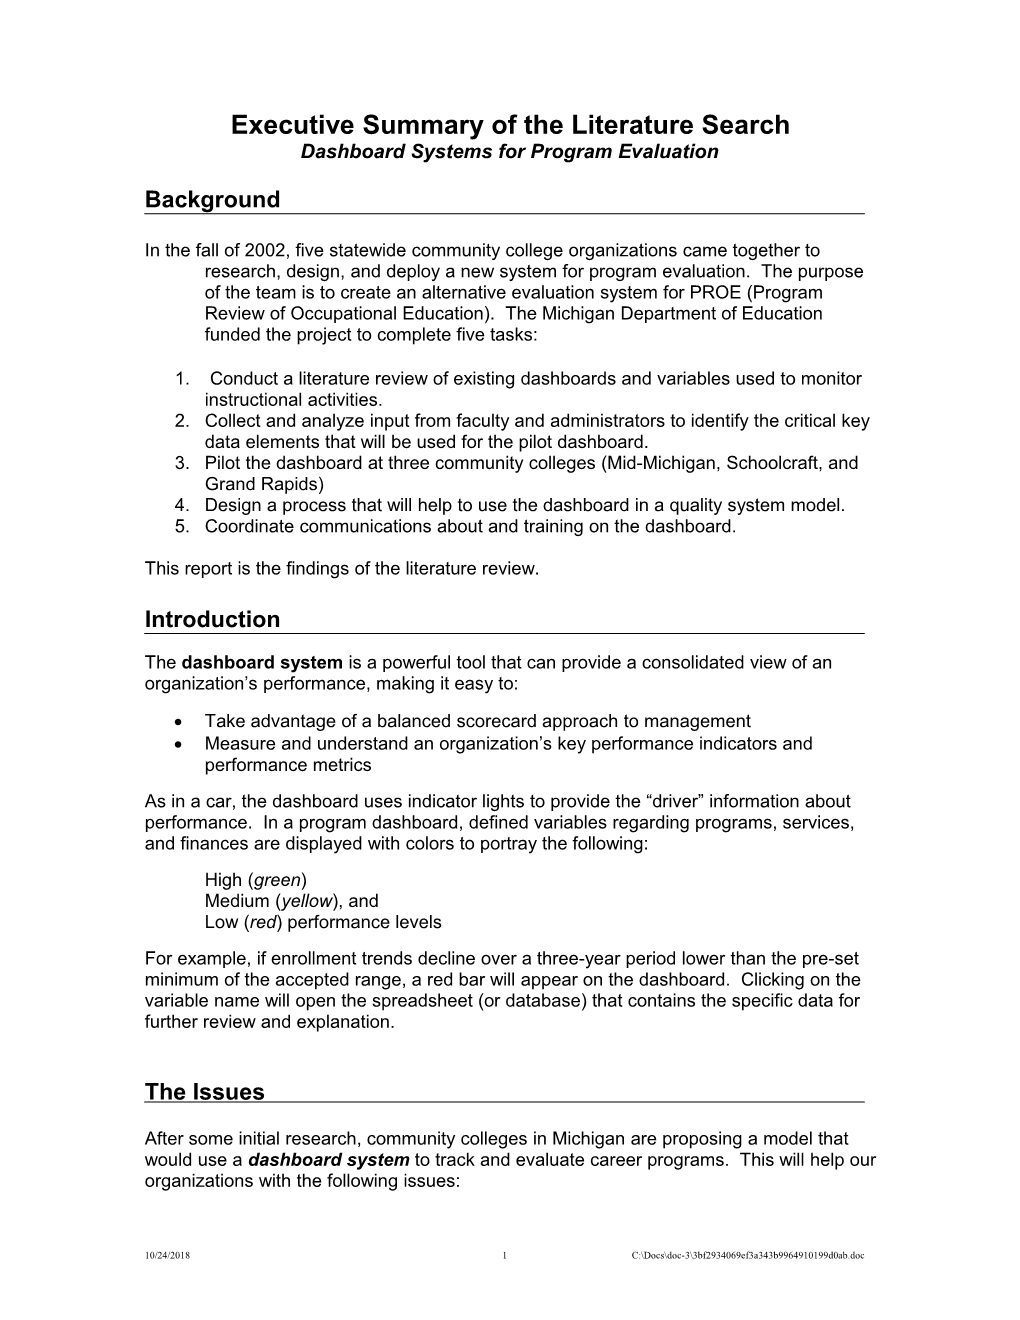 Executive Summary on Lit Search 2 Pages